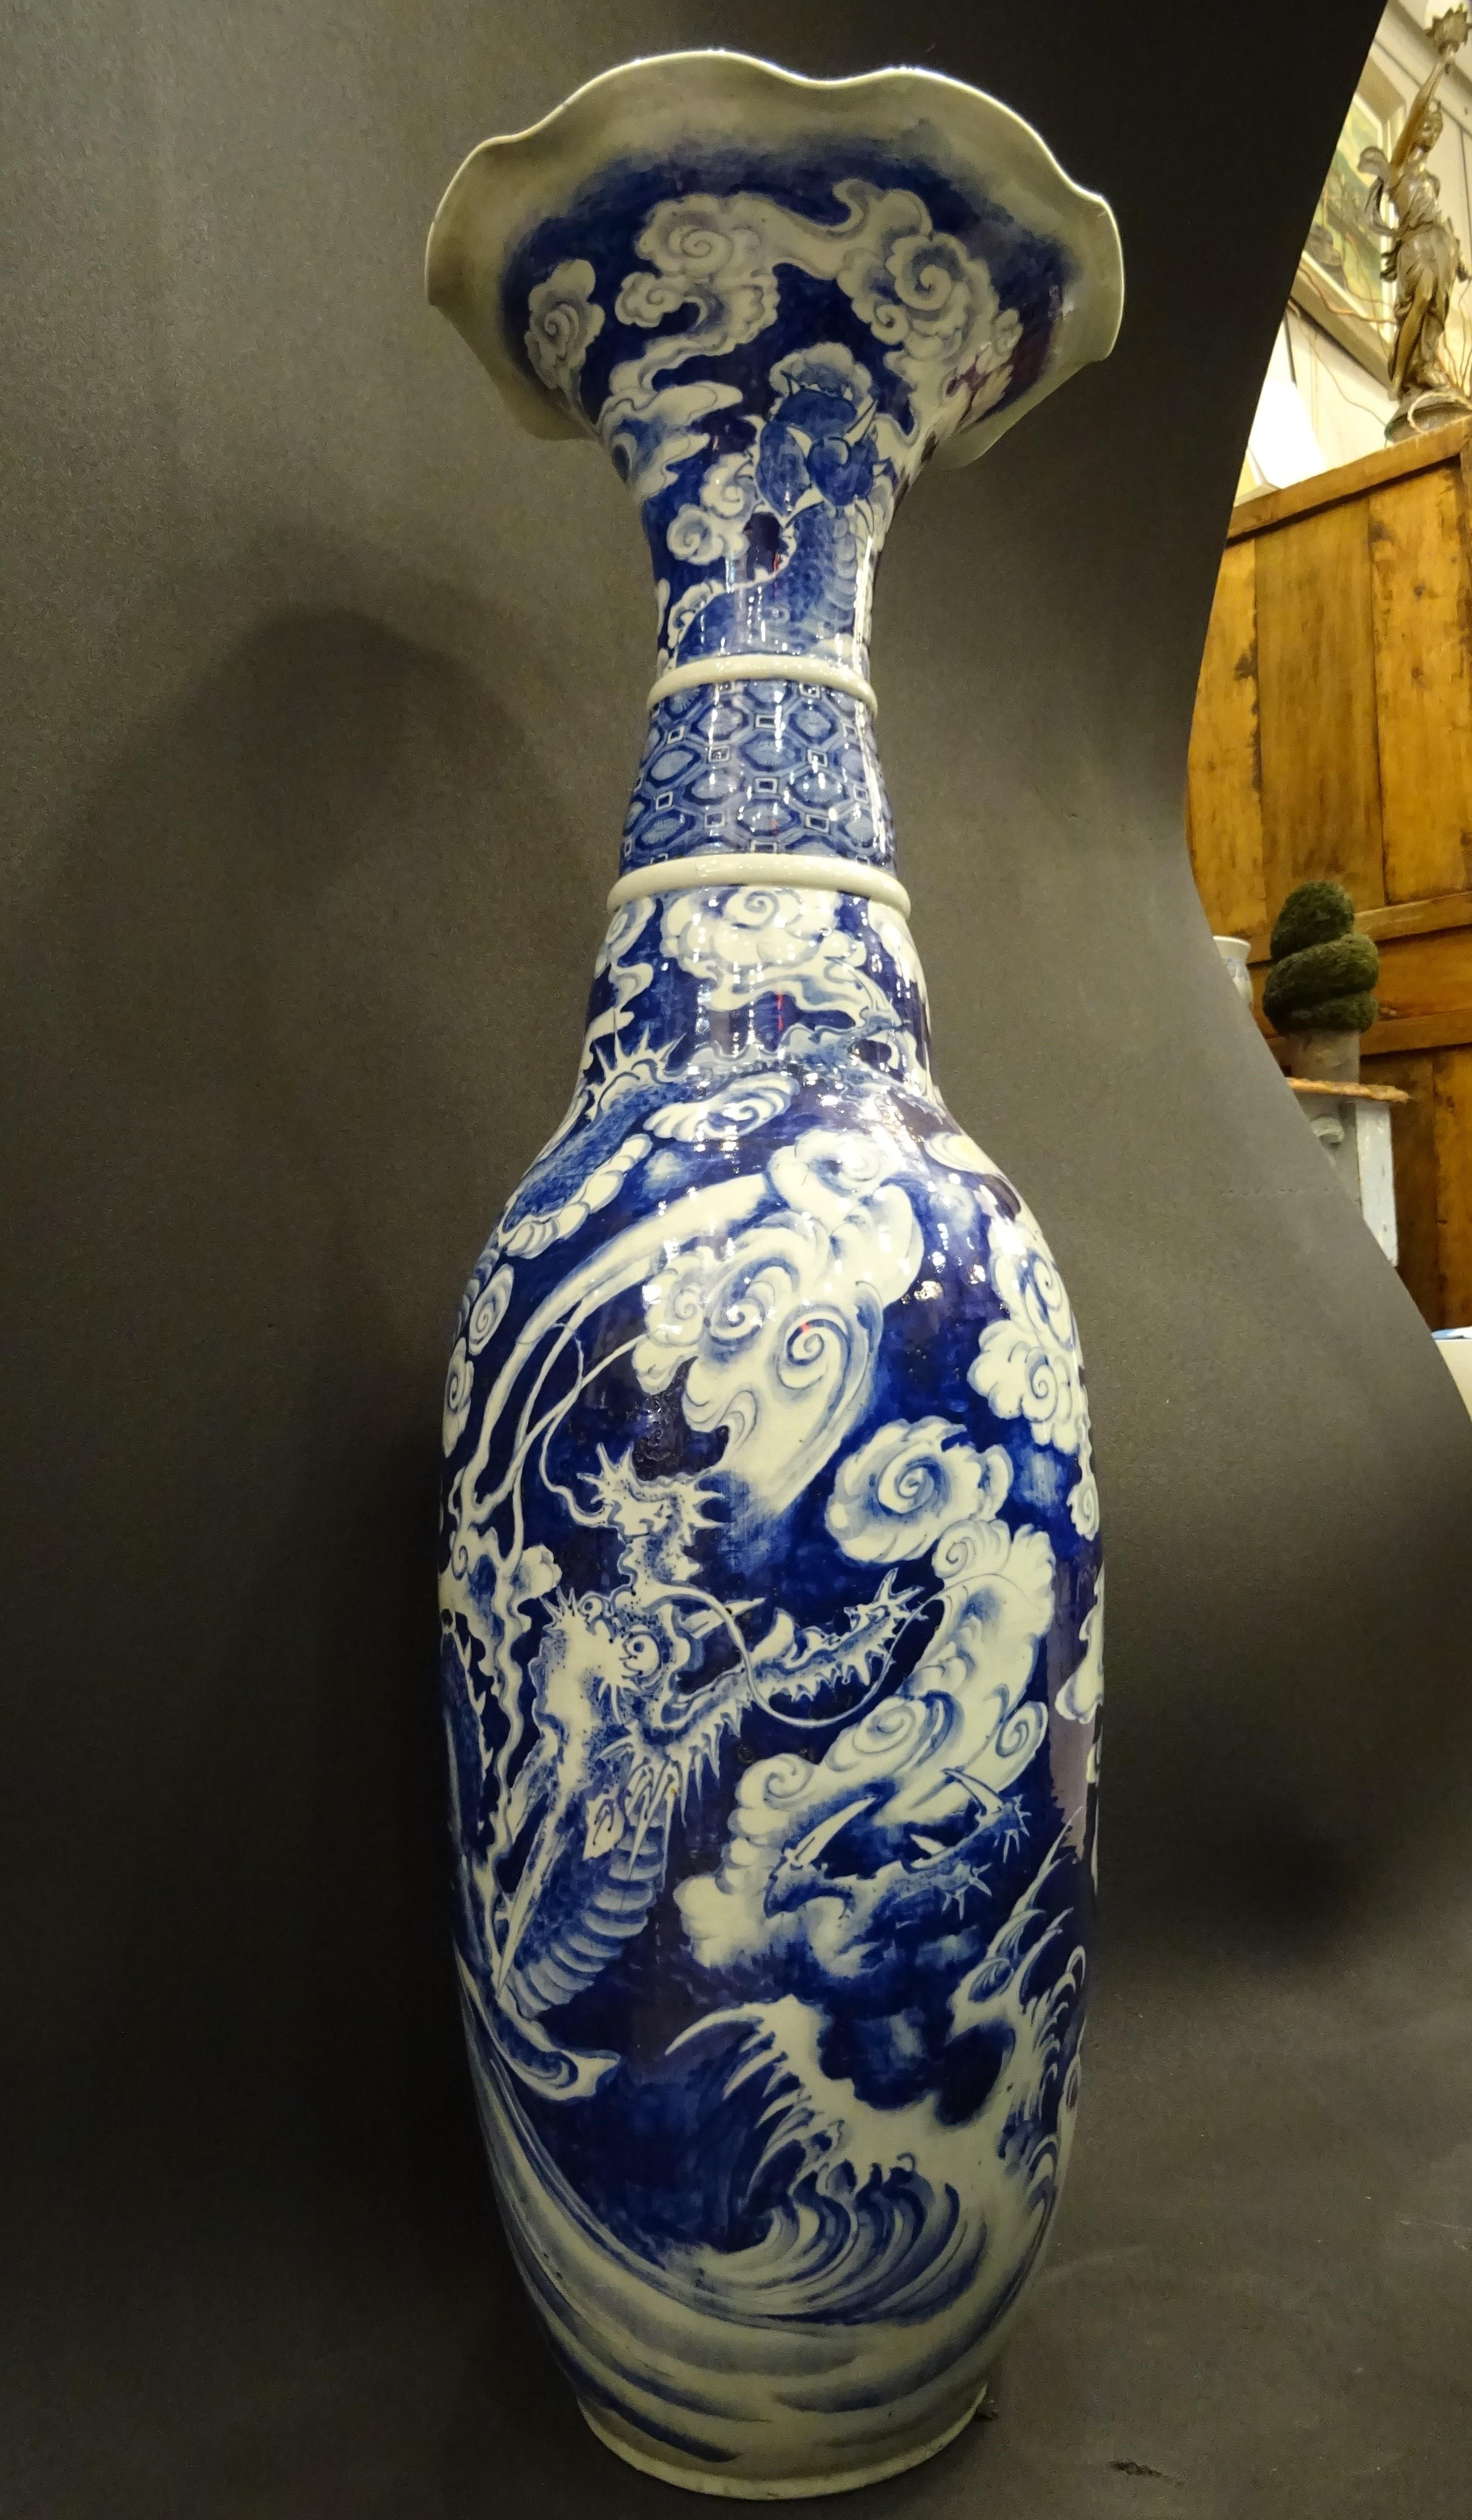 Amazing and one of a king big porcelain hand painted vase, Japanese school, period Meiji, circa 1900
With a dragon between clouds, all in a beautiful blue and white color.
It’s a stunning piece with a timeless design making your room curated and